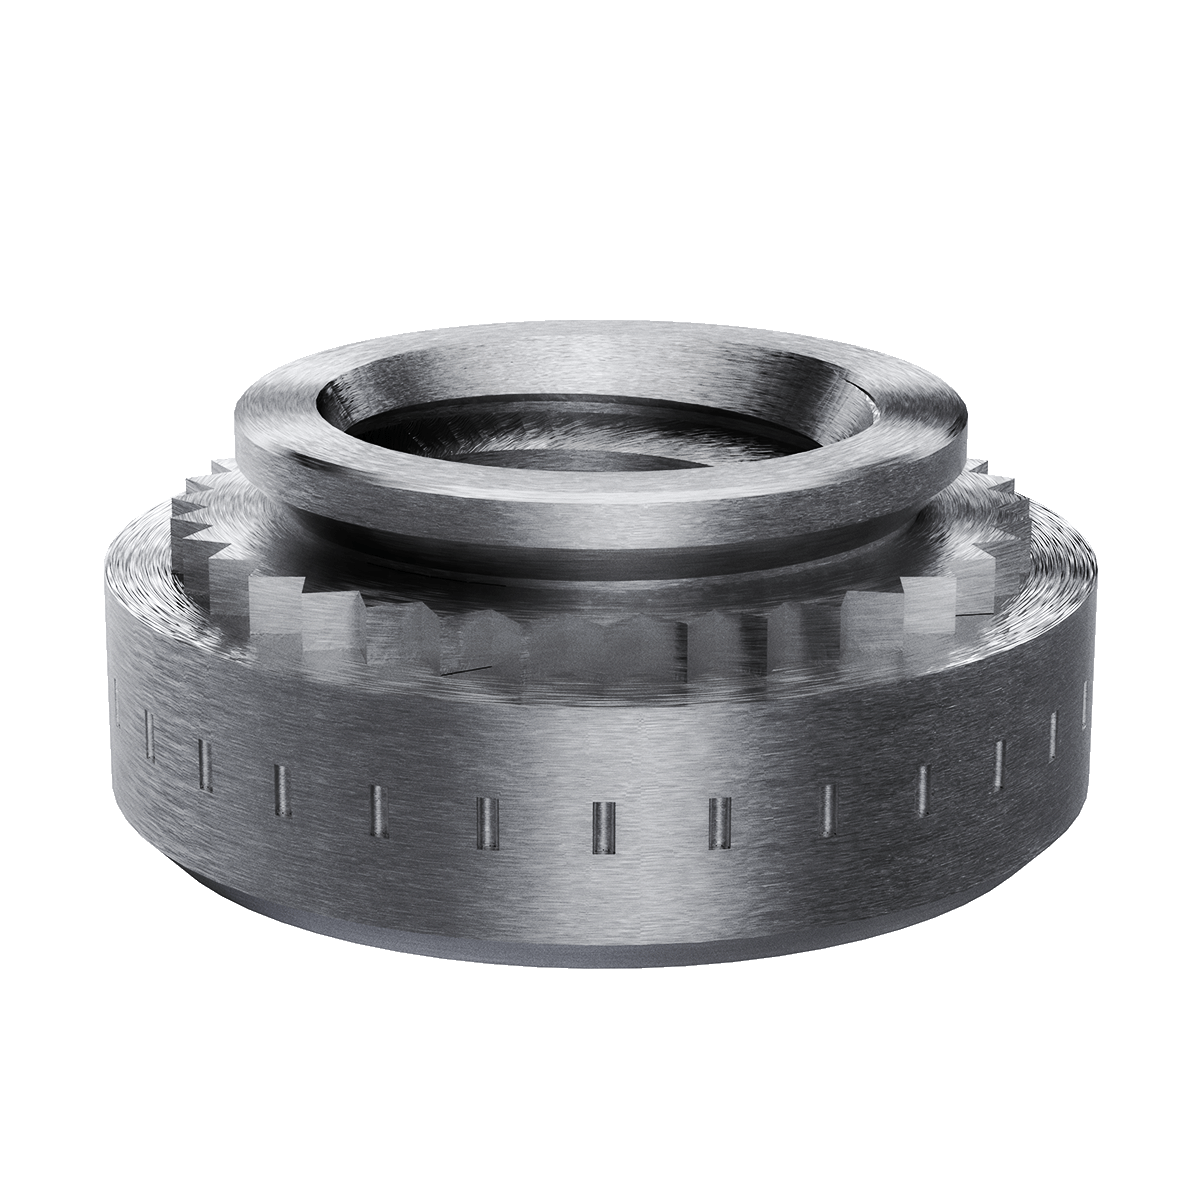 Self-Clinching Nut, For SS, 17-4 Stainless Steel, Passivated, 8-32 x 1, 100 Pack